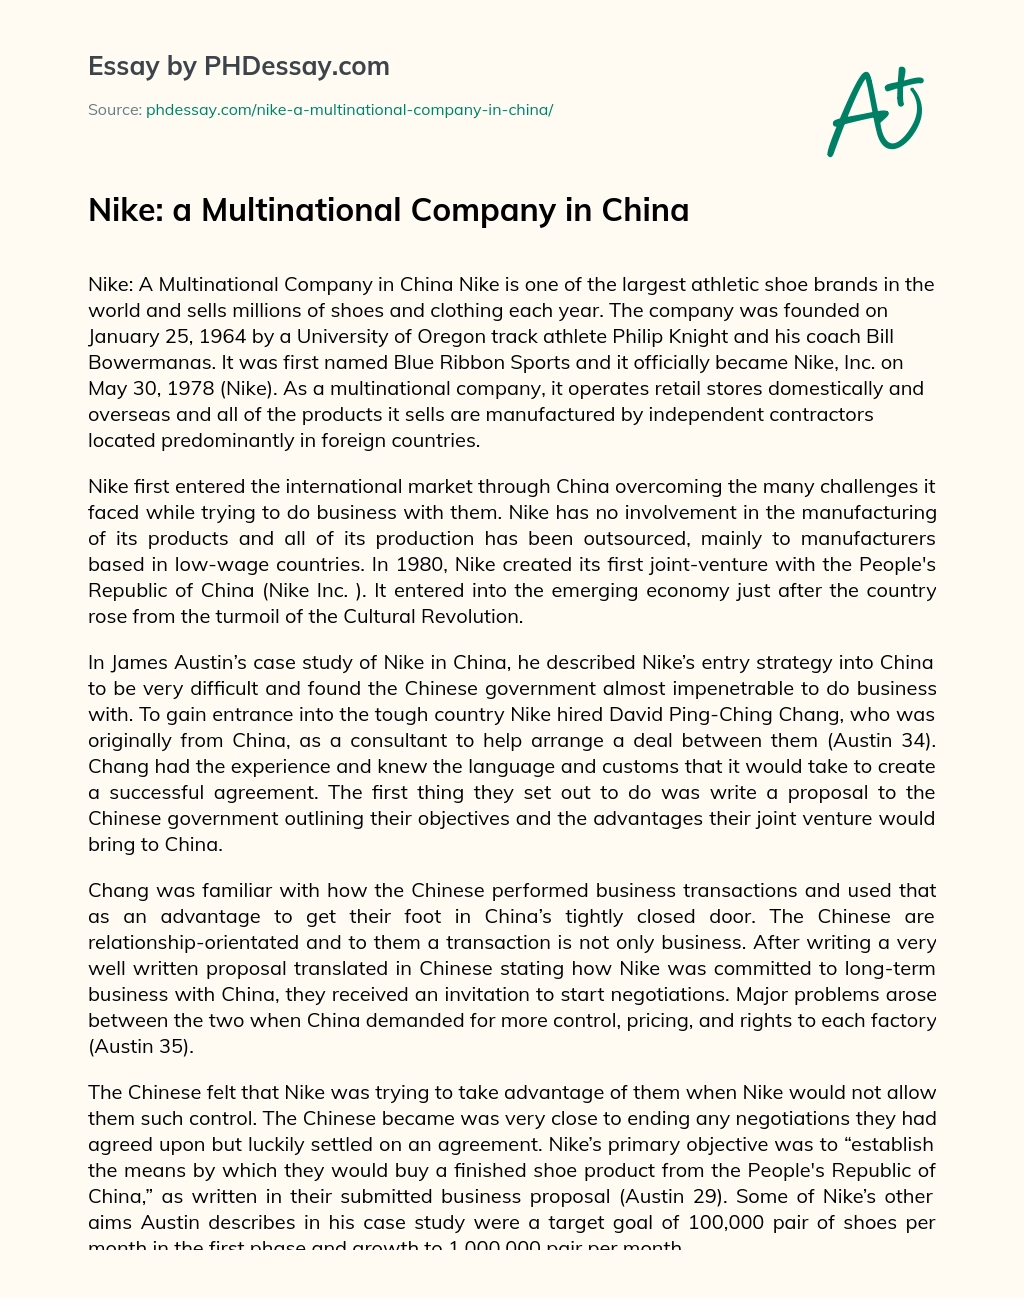 Nike: a Multinational Company in China essay